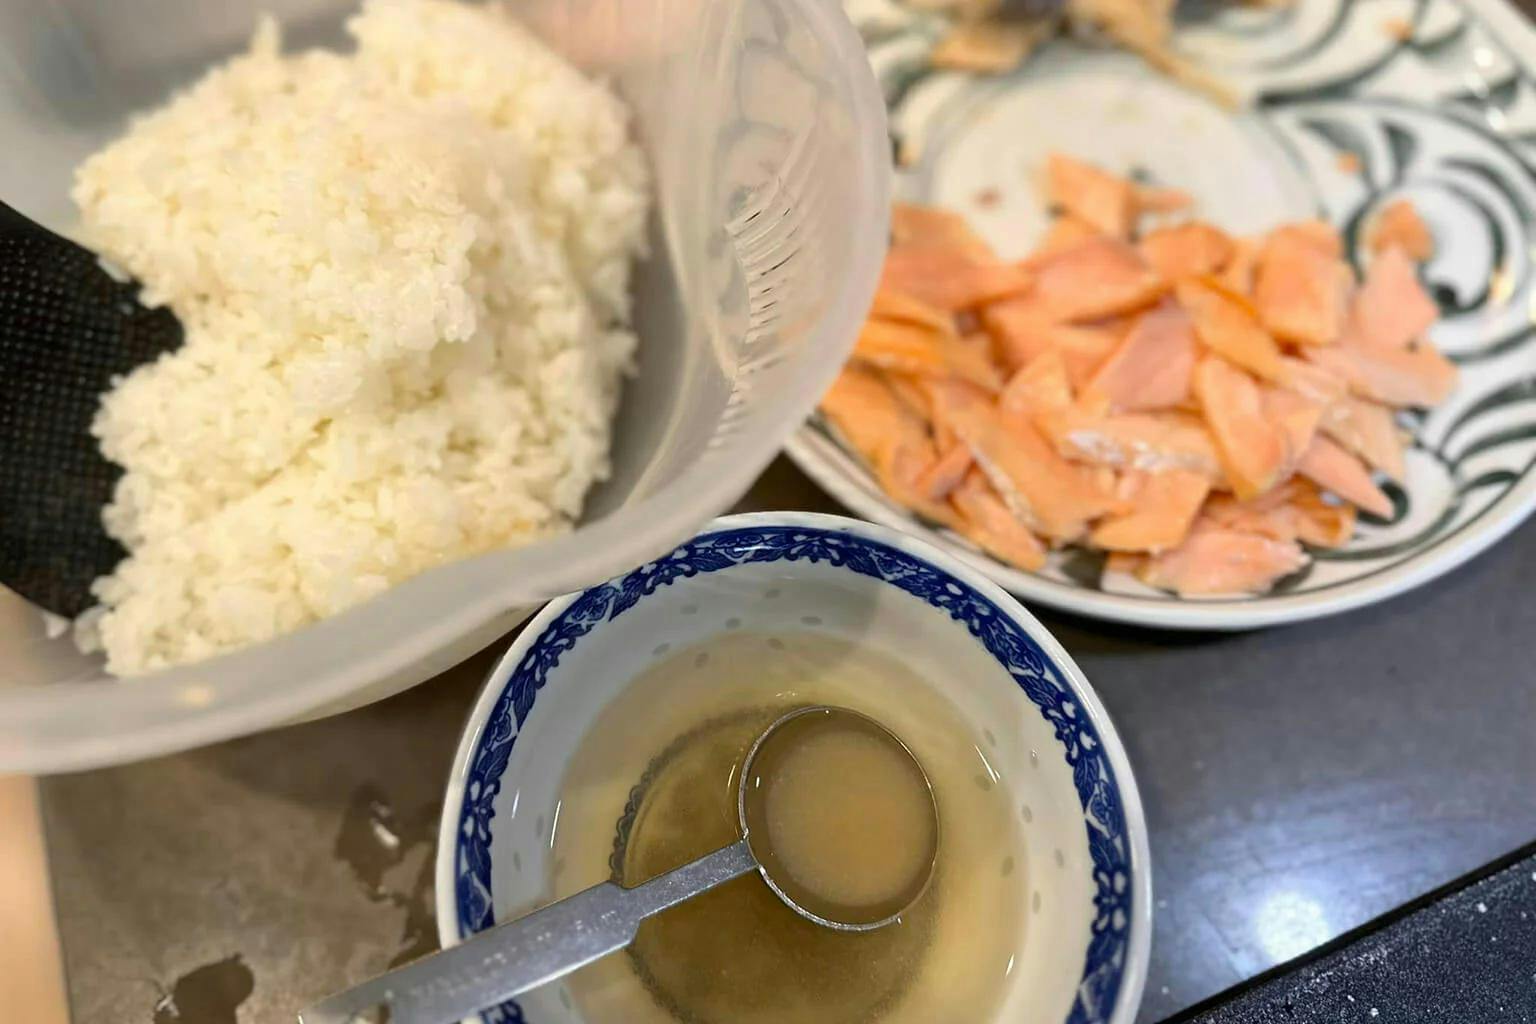 How to prepare a rice ball with a cooked salmon